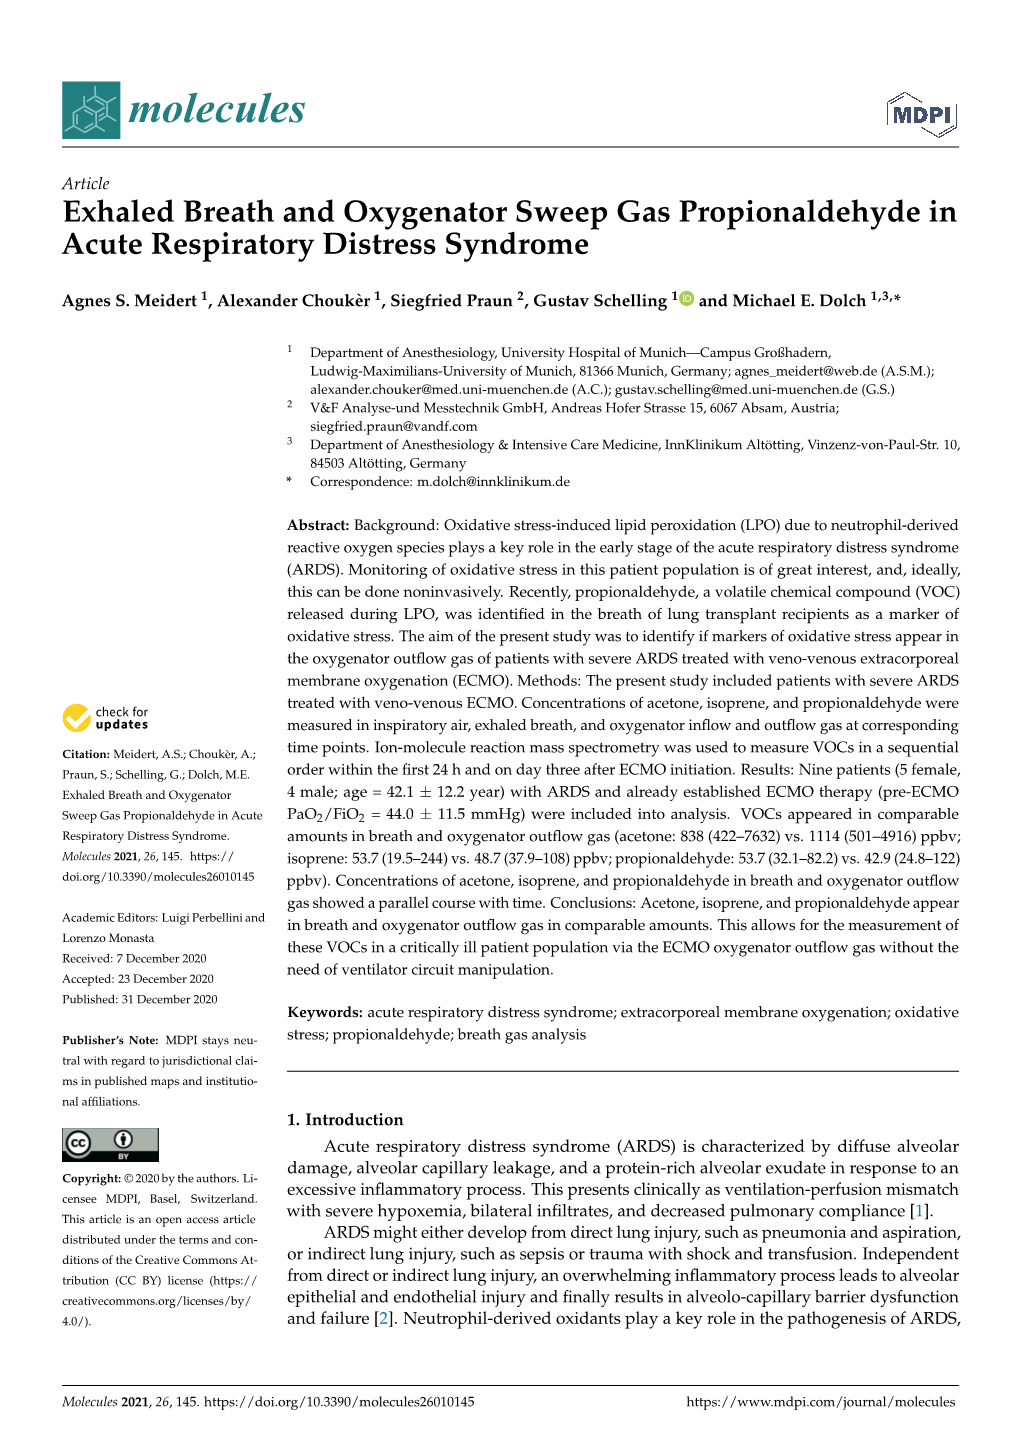 Exhaled Breath and Oxygenator Sweep Gas Propionaldehyde in Acute Respiratory Distress Syndrome